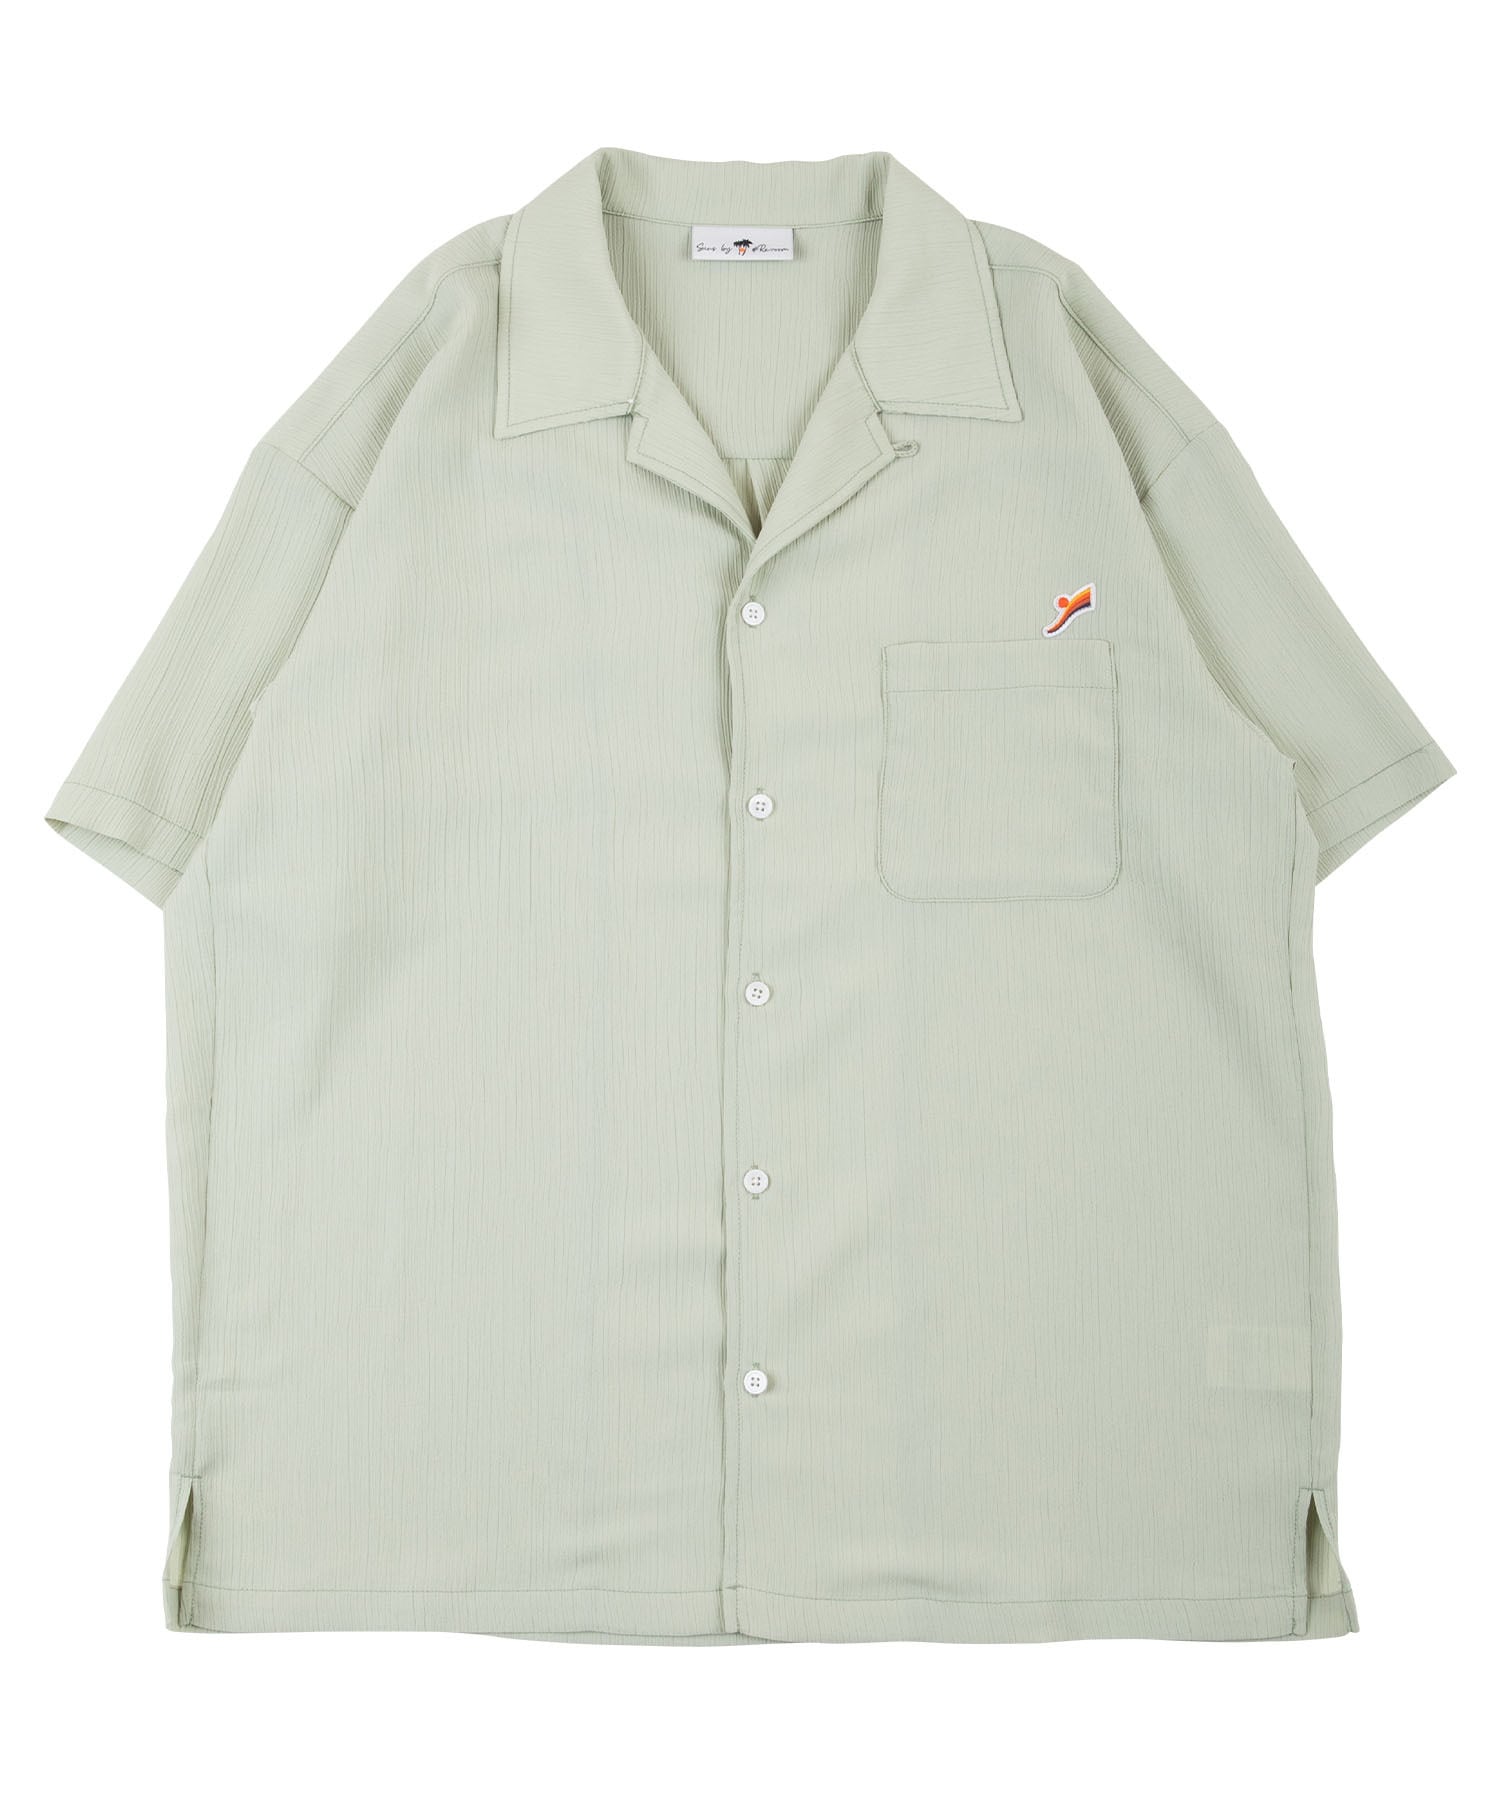 【SUNS】ONE POINT OPEN COLLAR SHIRTS［RSS010］